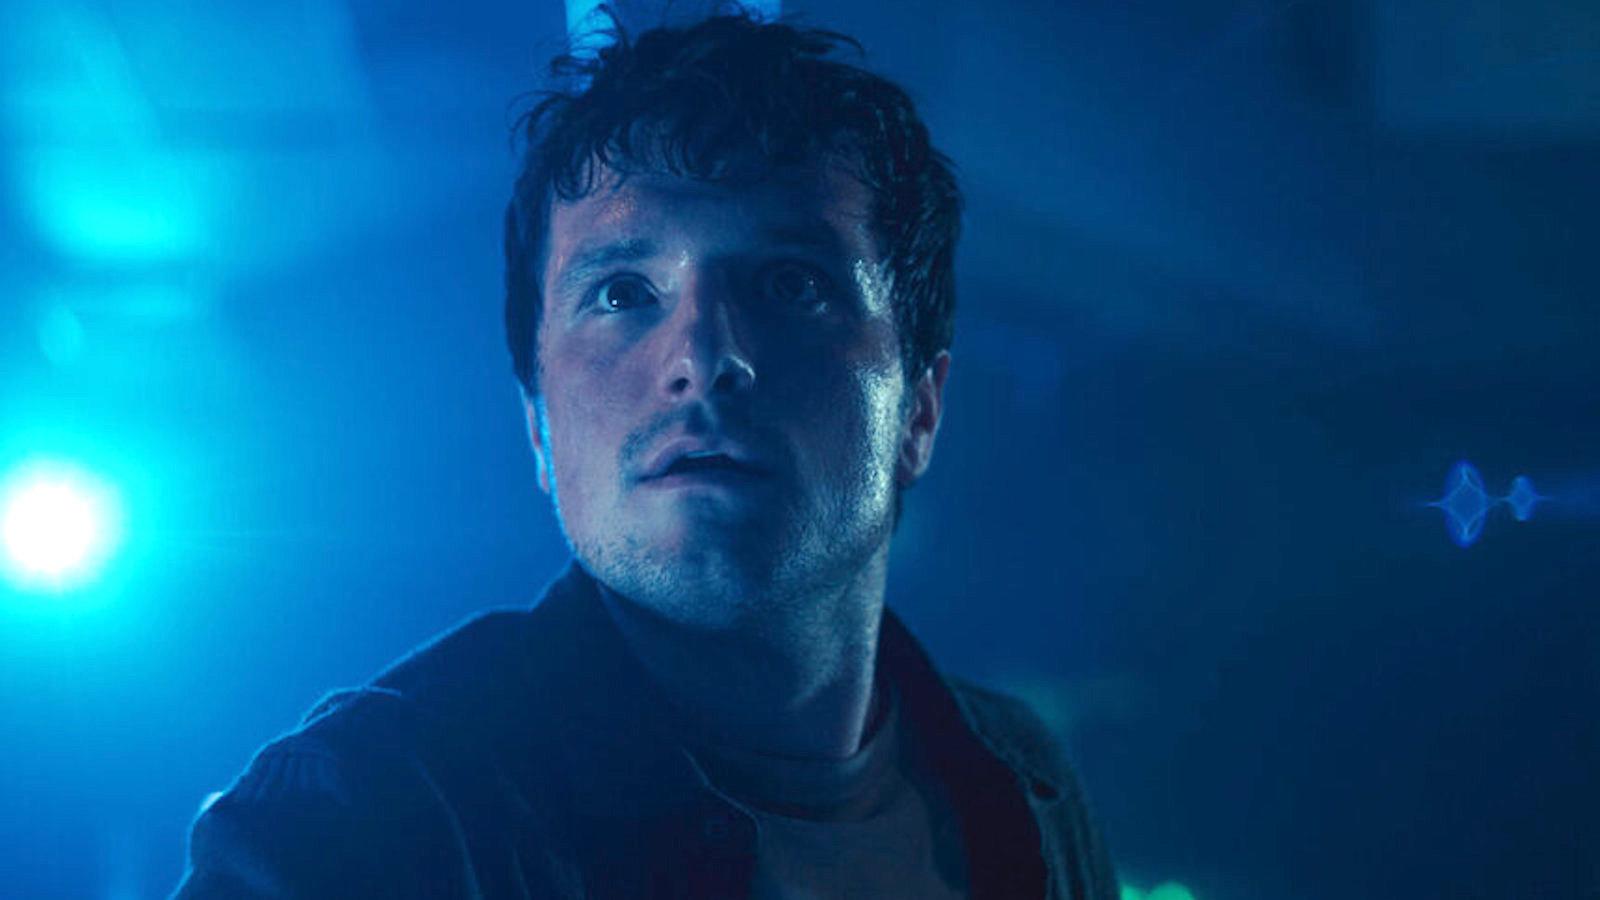 Mike in Five Nights at Freddy's played by Josh Hutcherson